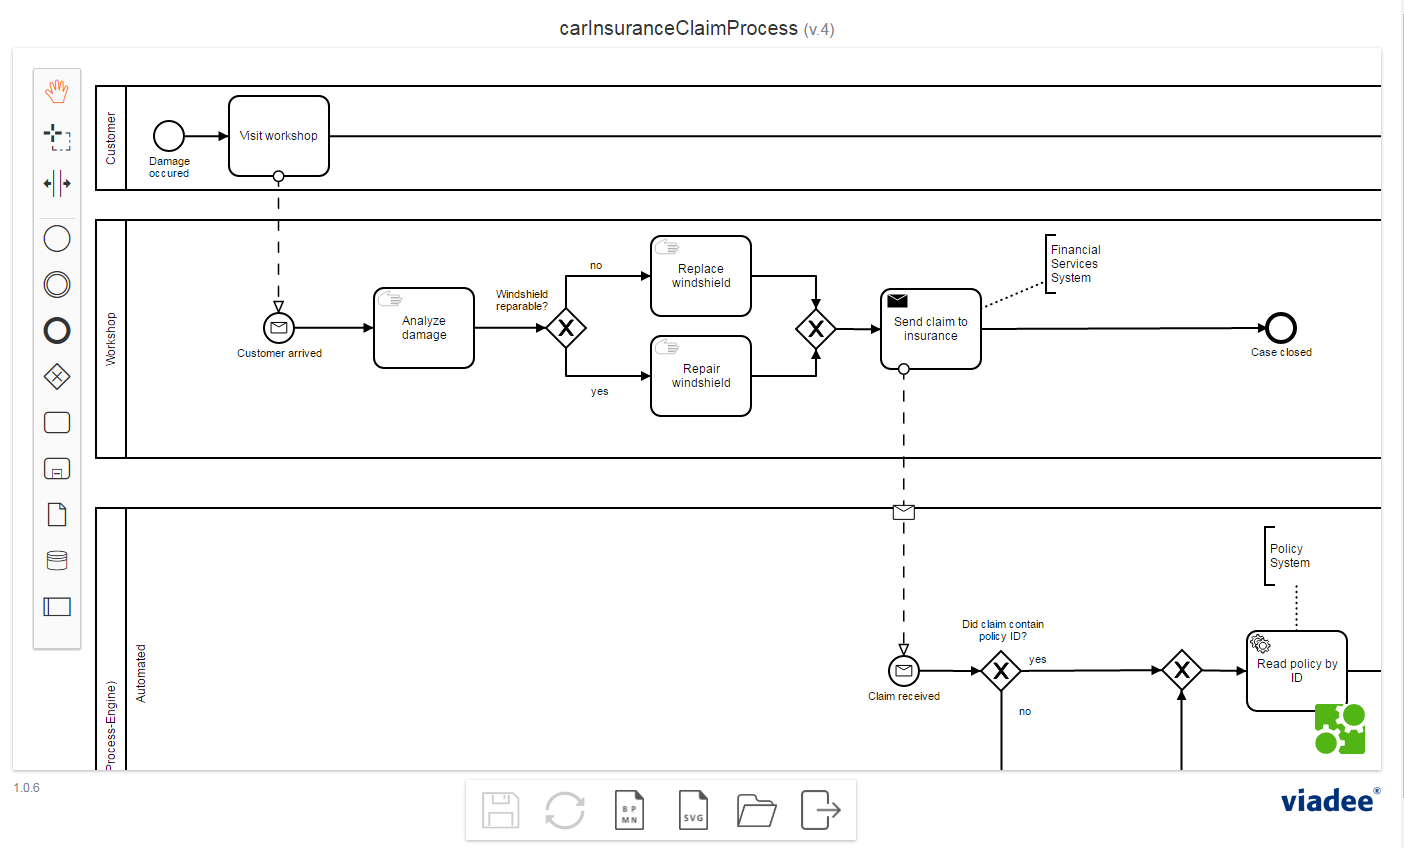 BPMN Modeler: create and edit your process models directly in Confluence